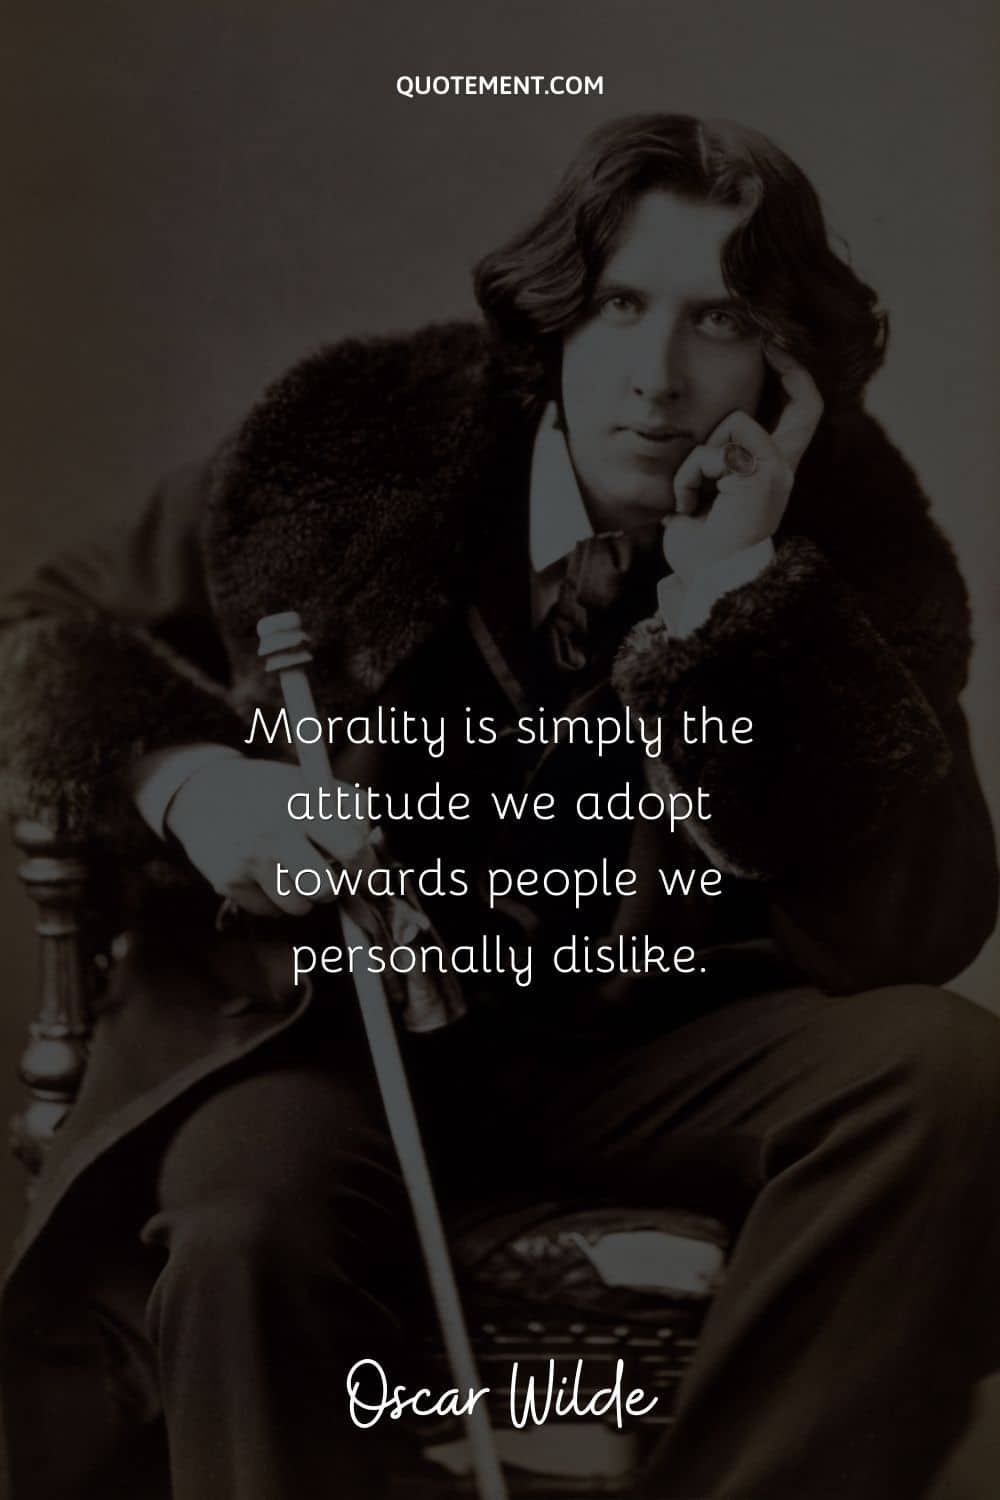 “Morality is simply the attitude we adopt towards people we personally dislike.” ― Oscar Wilde (An Ideal Husband)